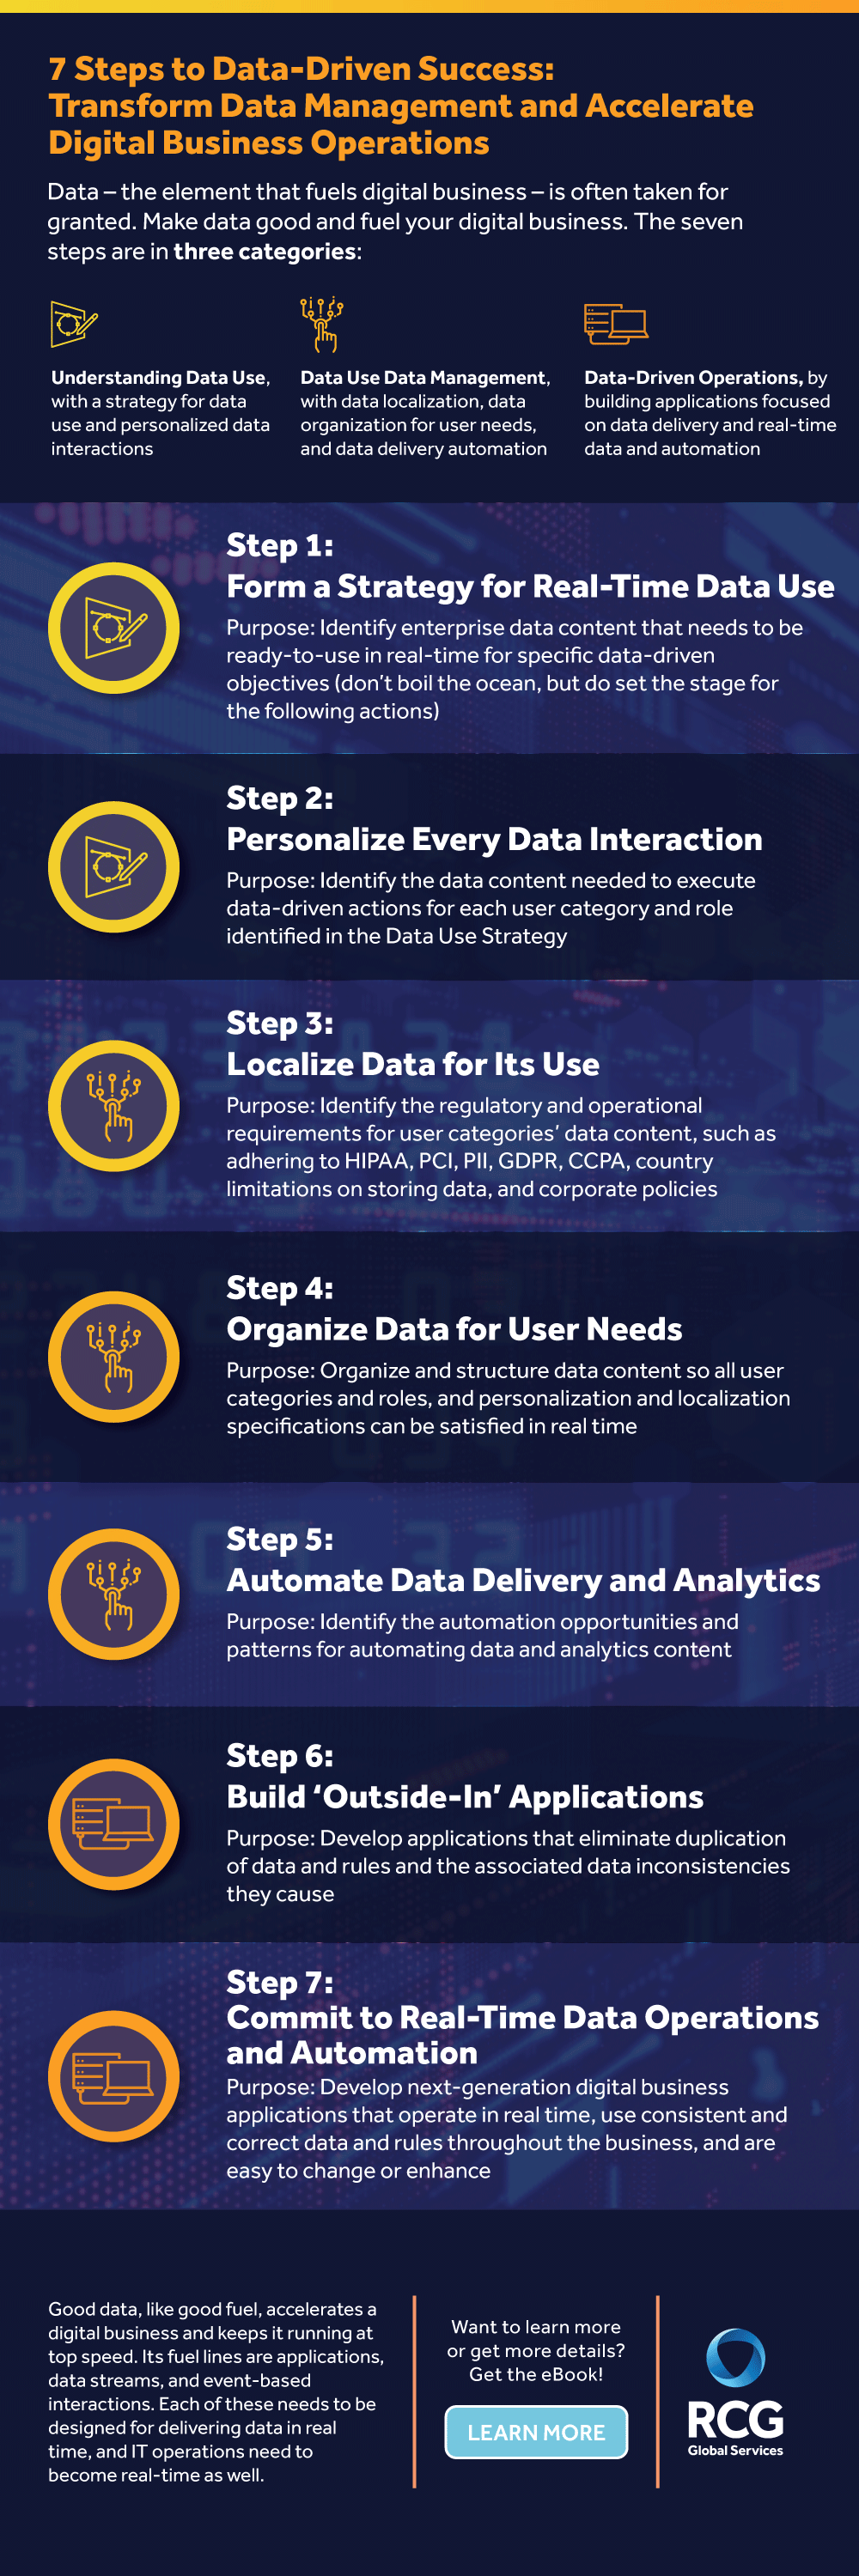 7 Steps to Data-Driven Success Infographic